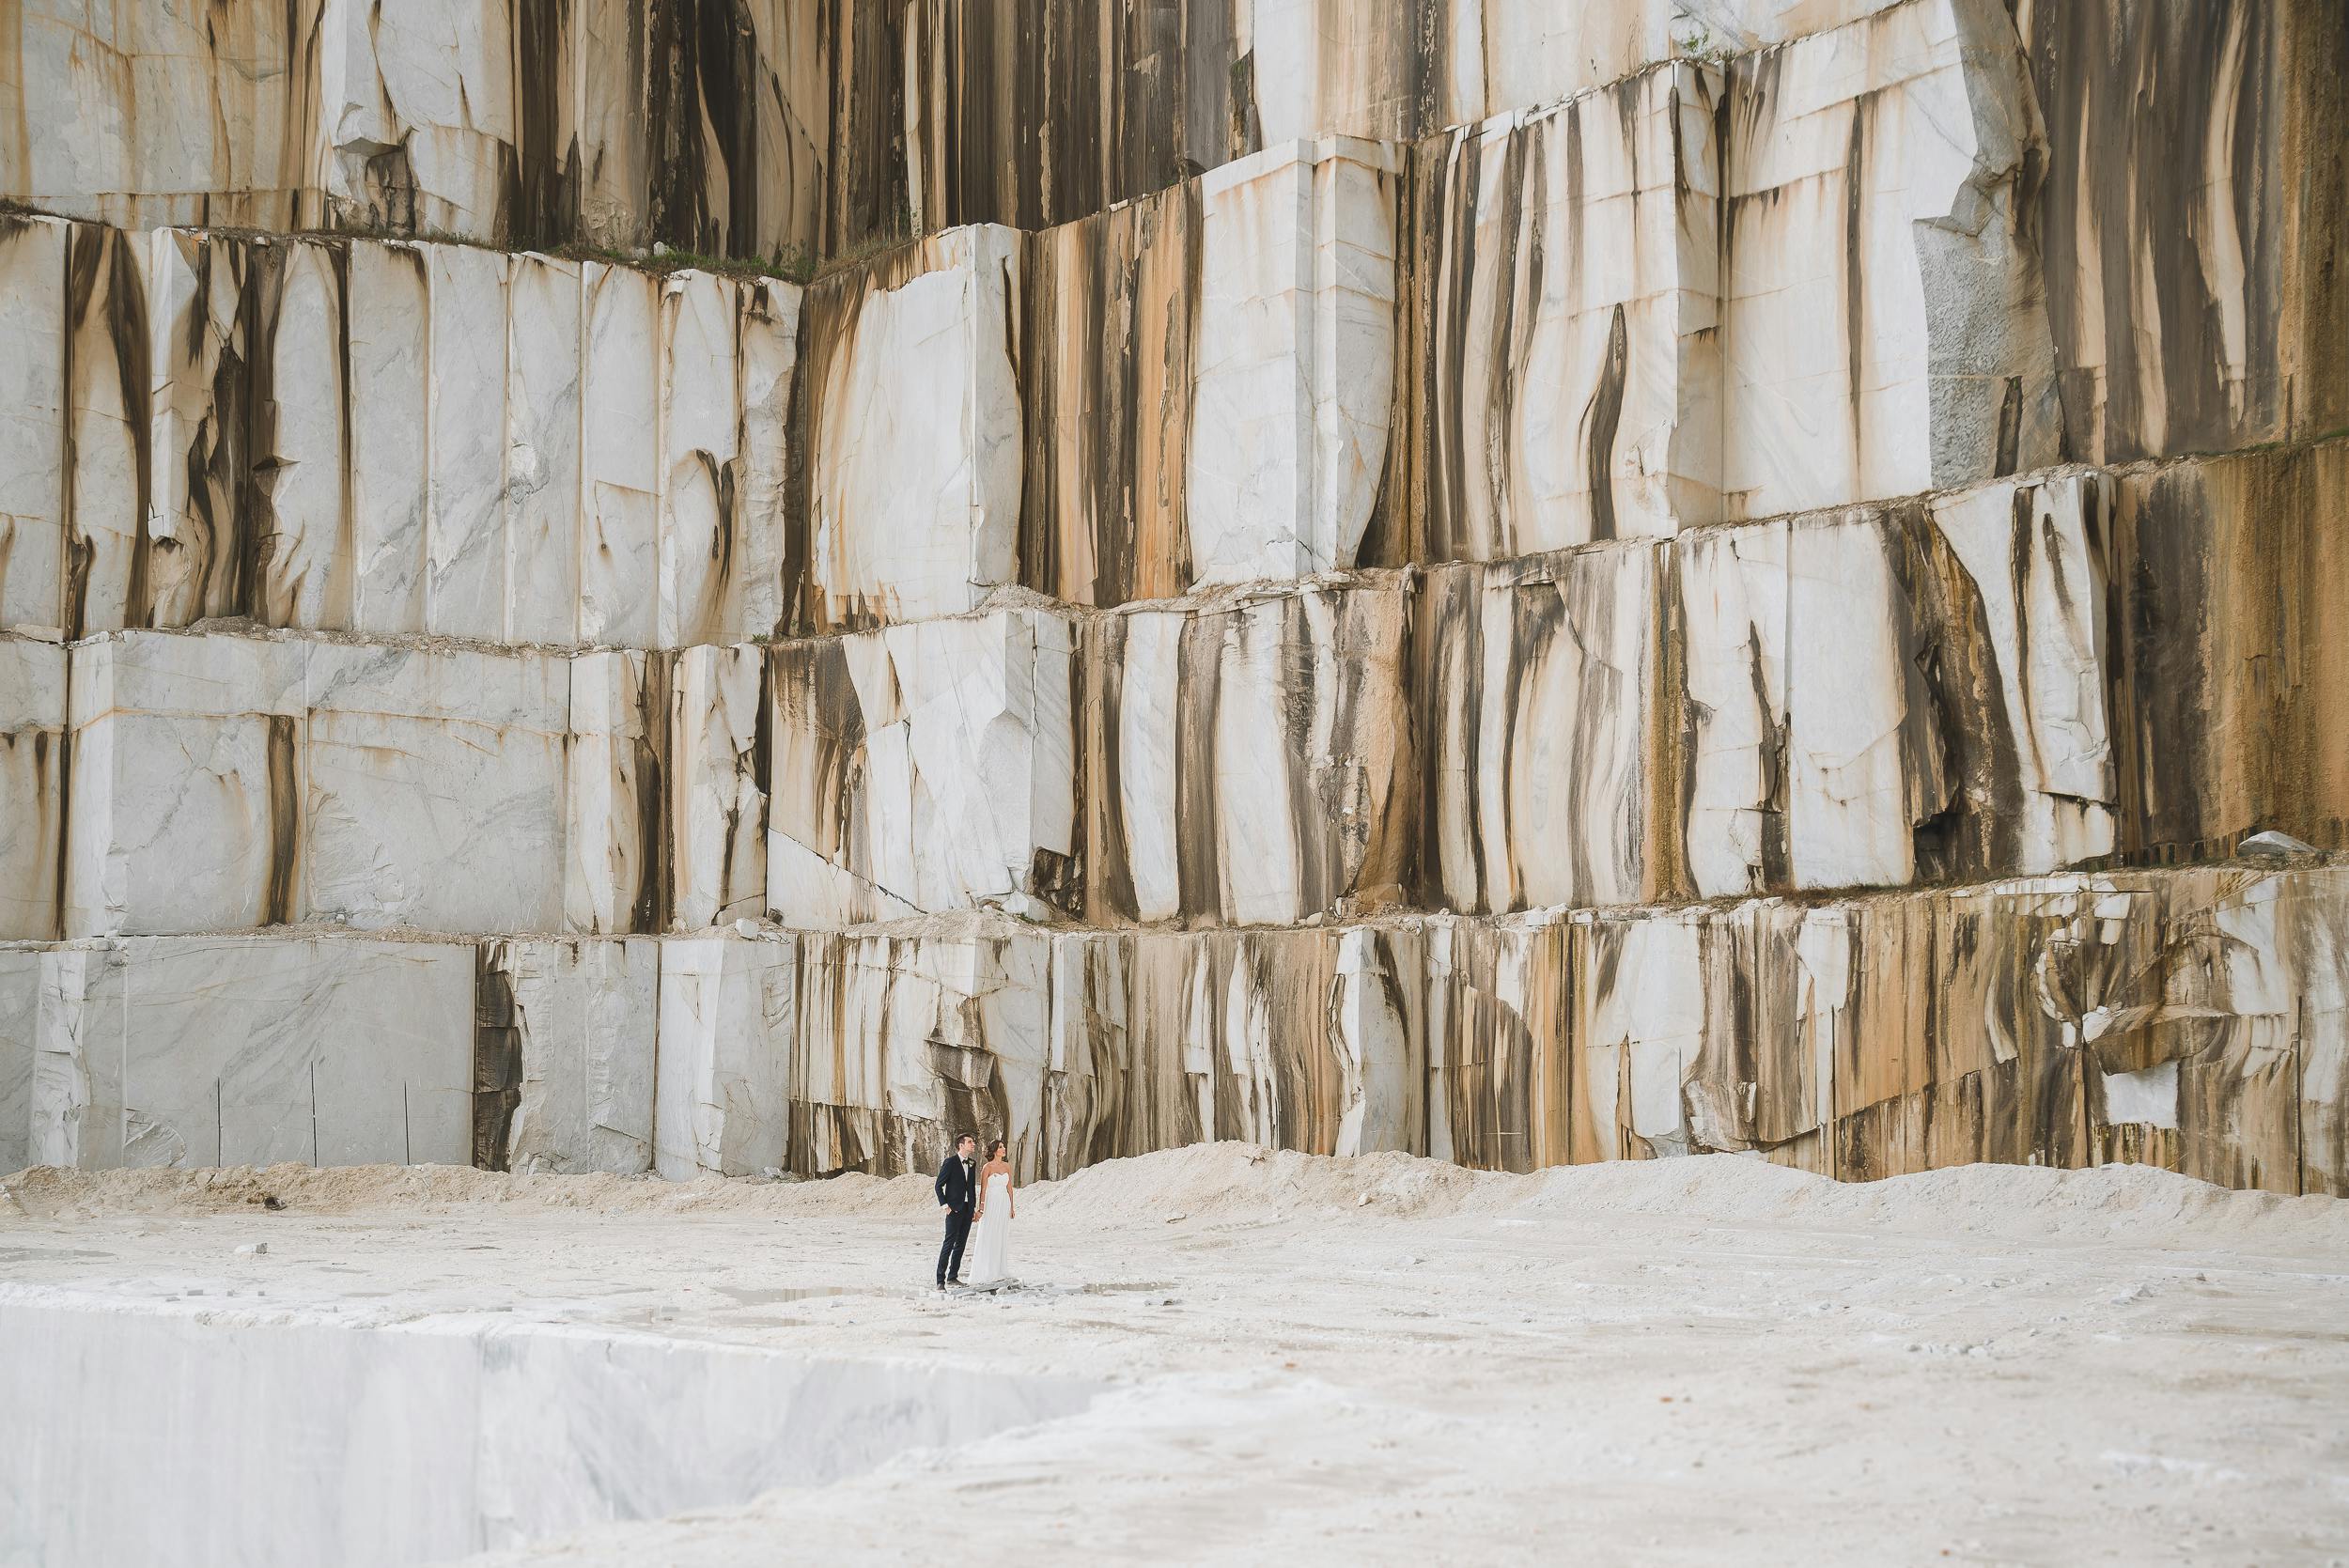 - Introducing the Top 10 Marble Mines